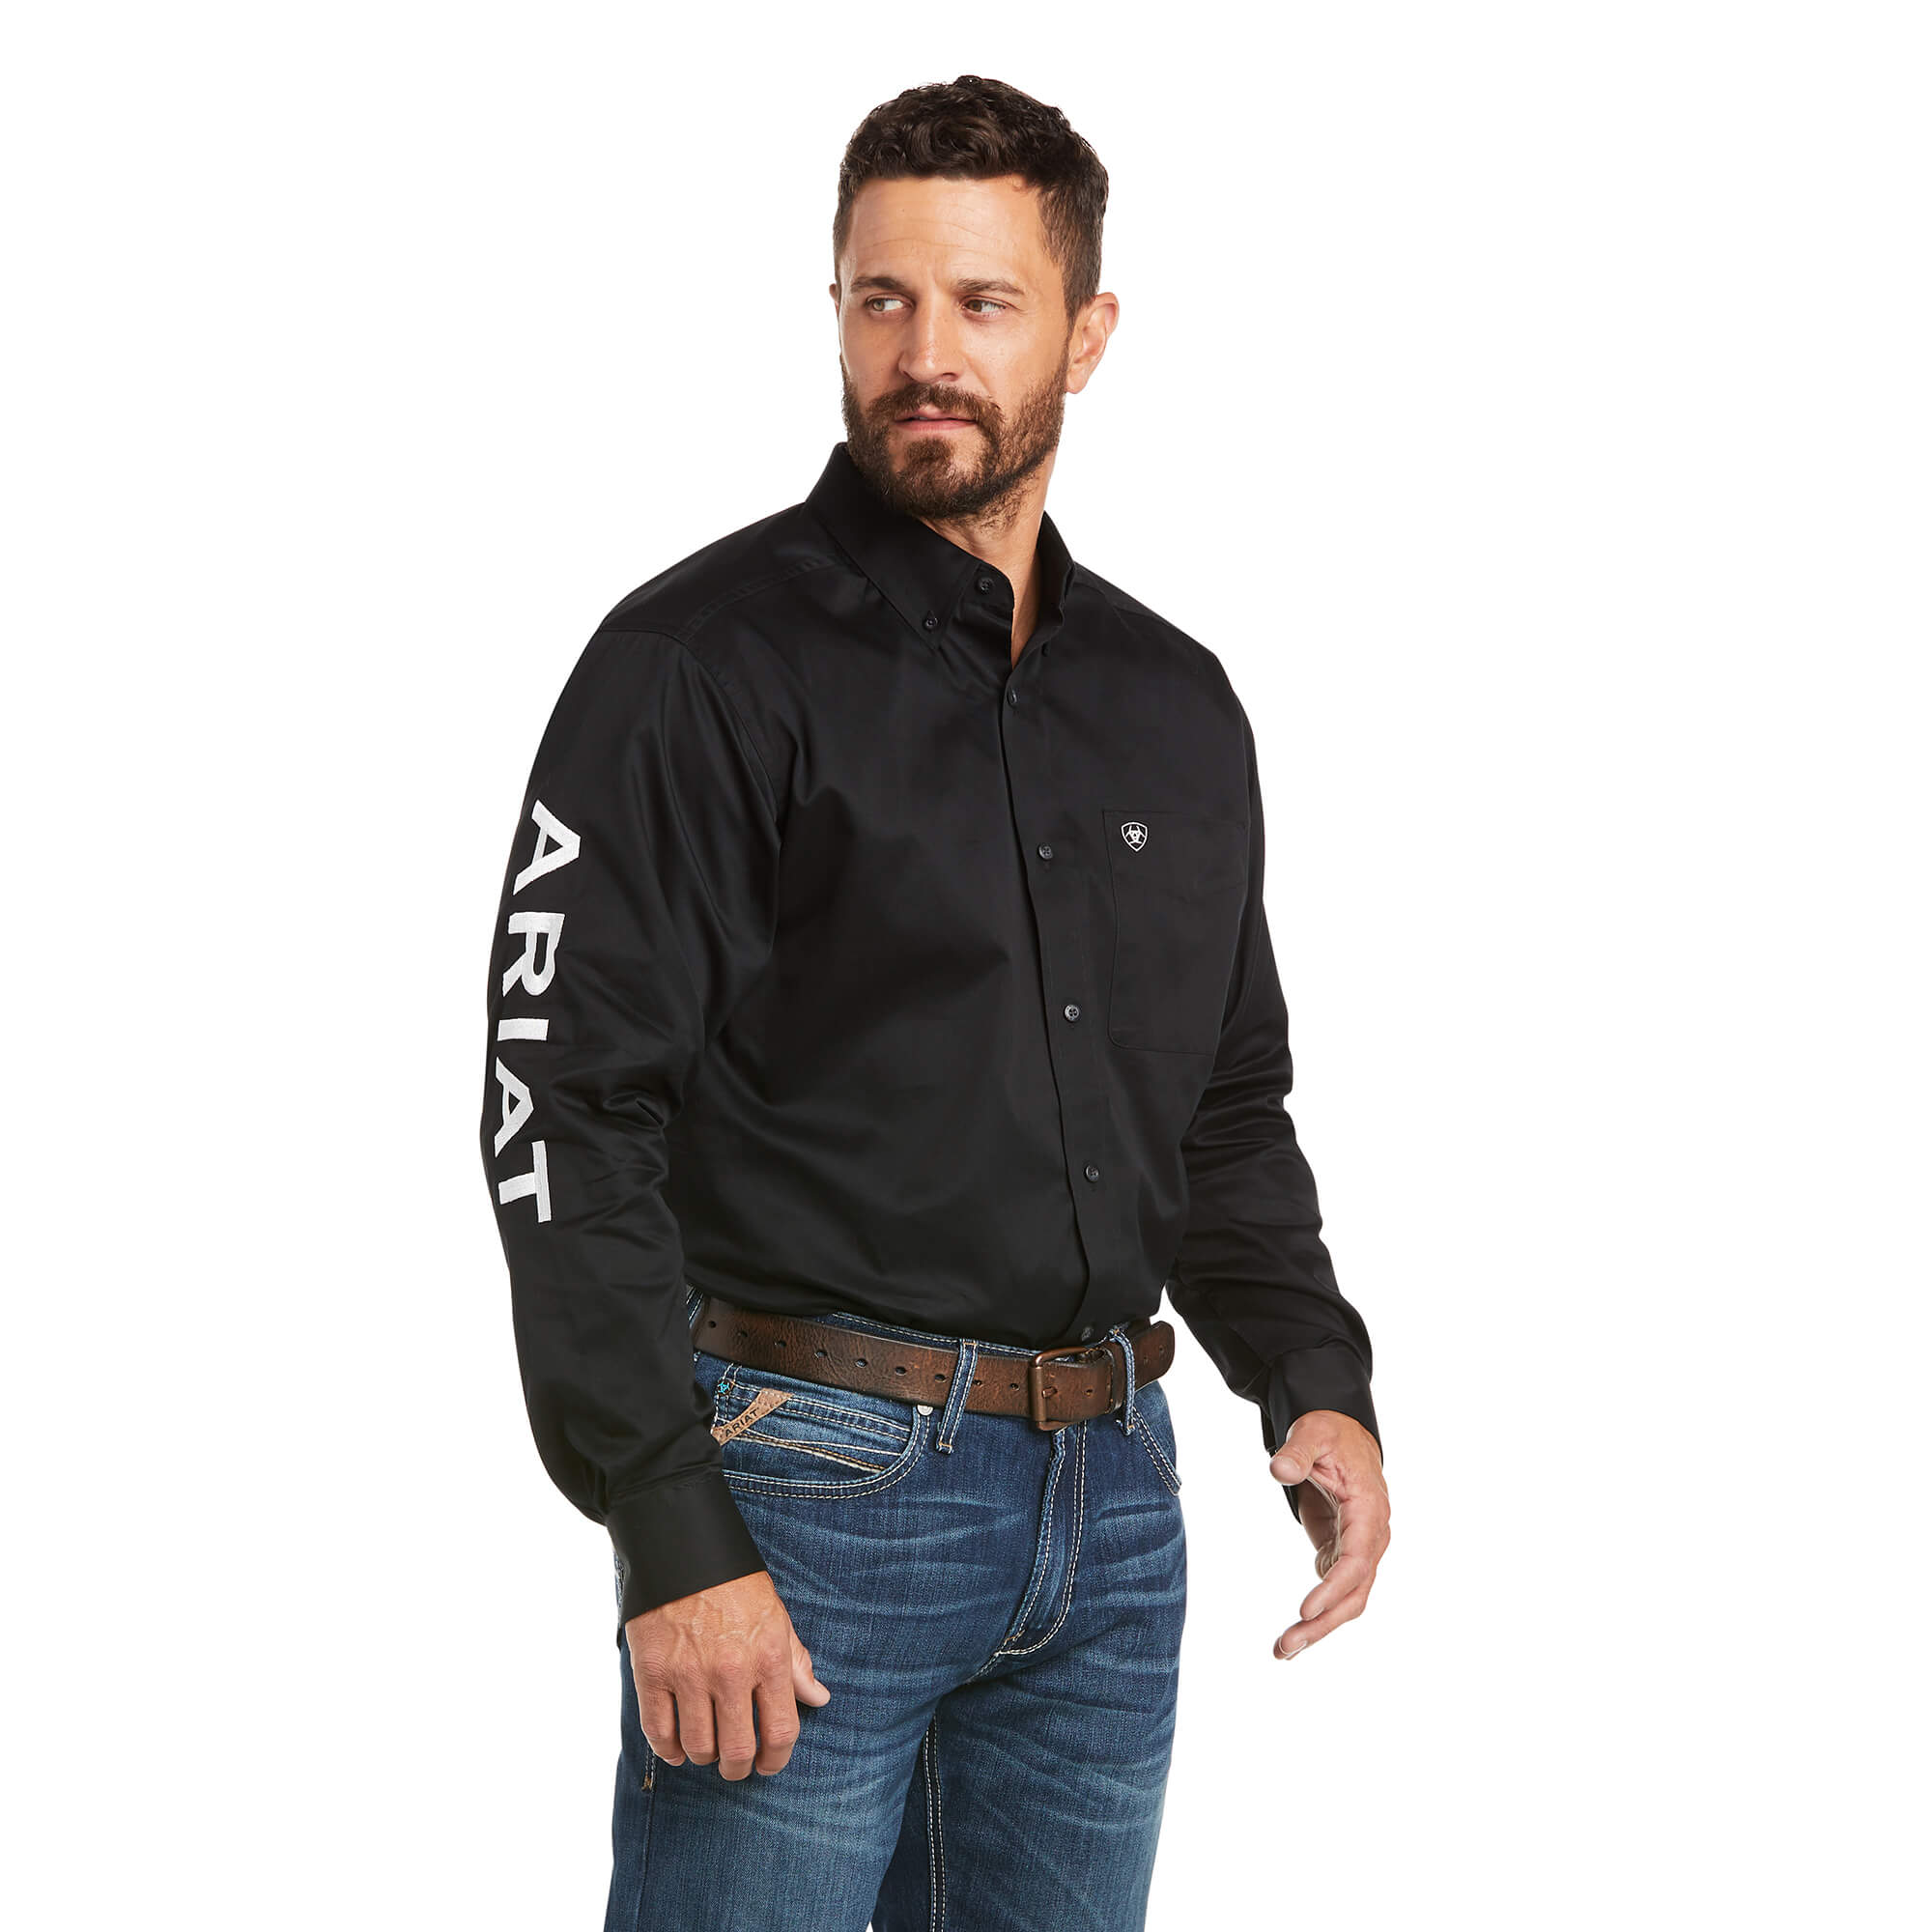 Men's Solid Twill Classic Fit Shirt in Black, Size: Medium by Ariat